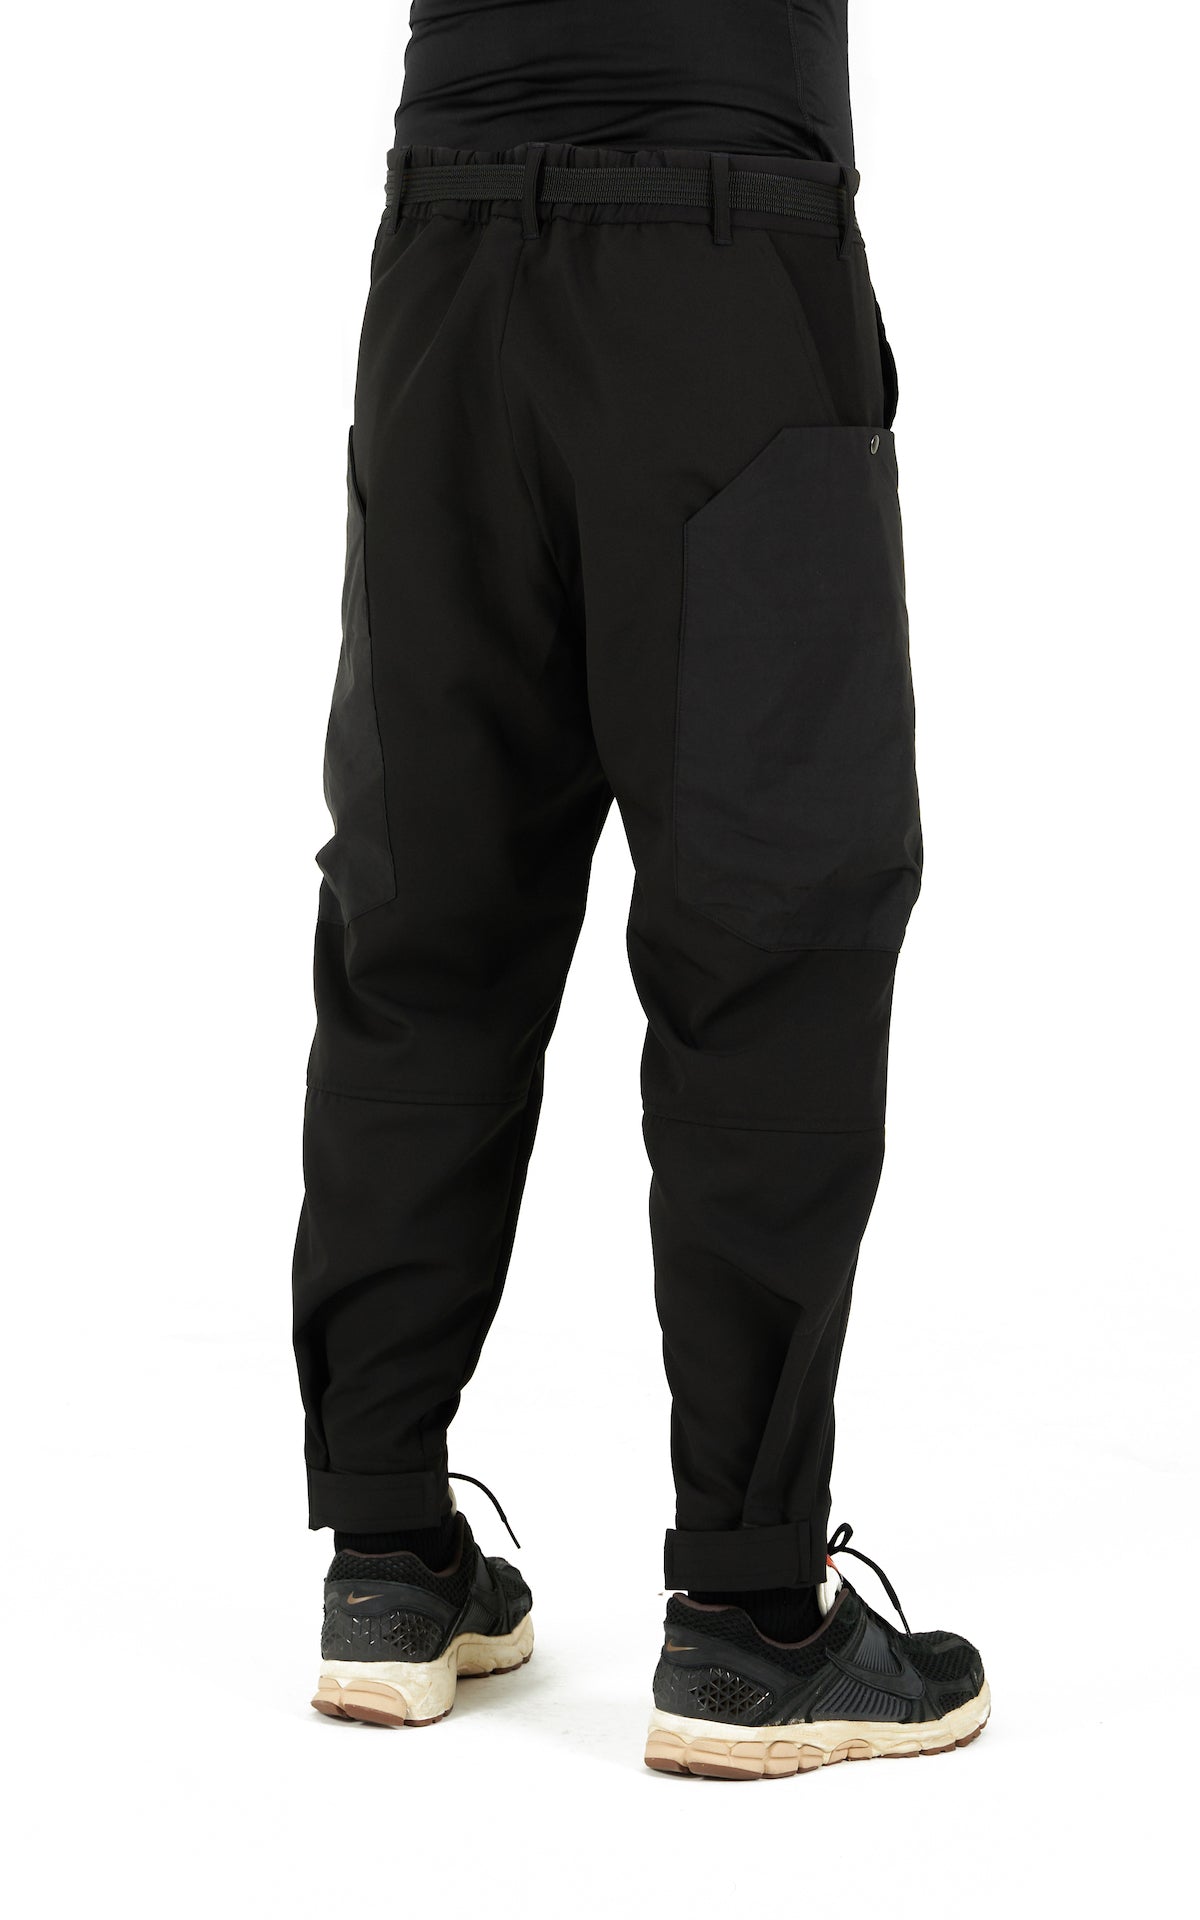 Essential comfort stretch cargo trousers